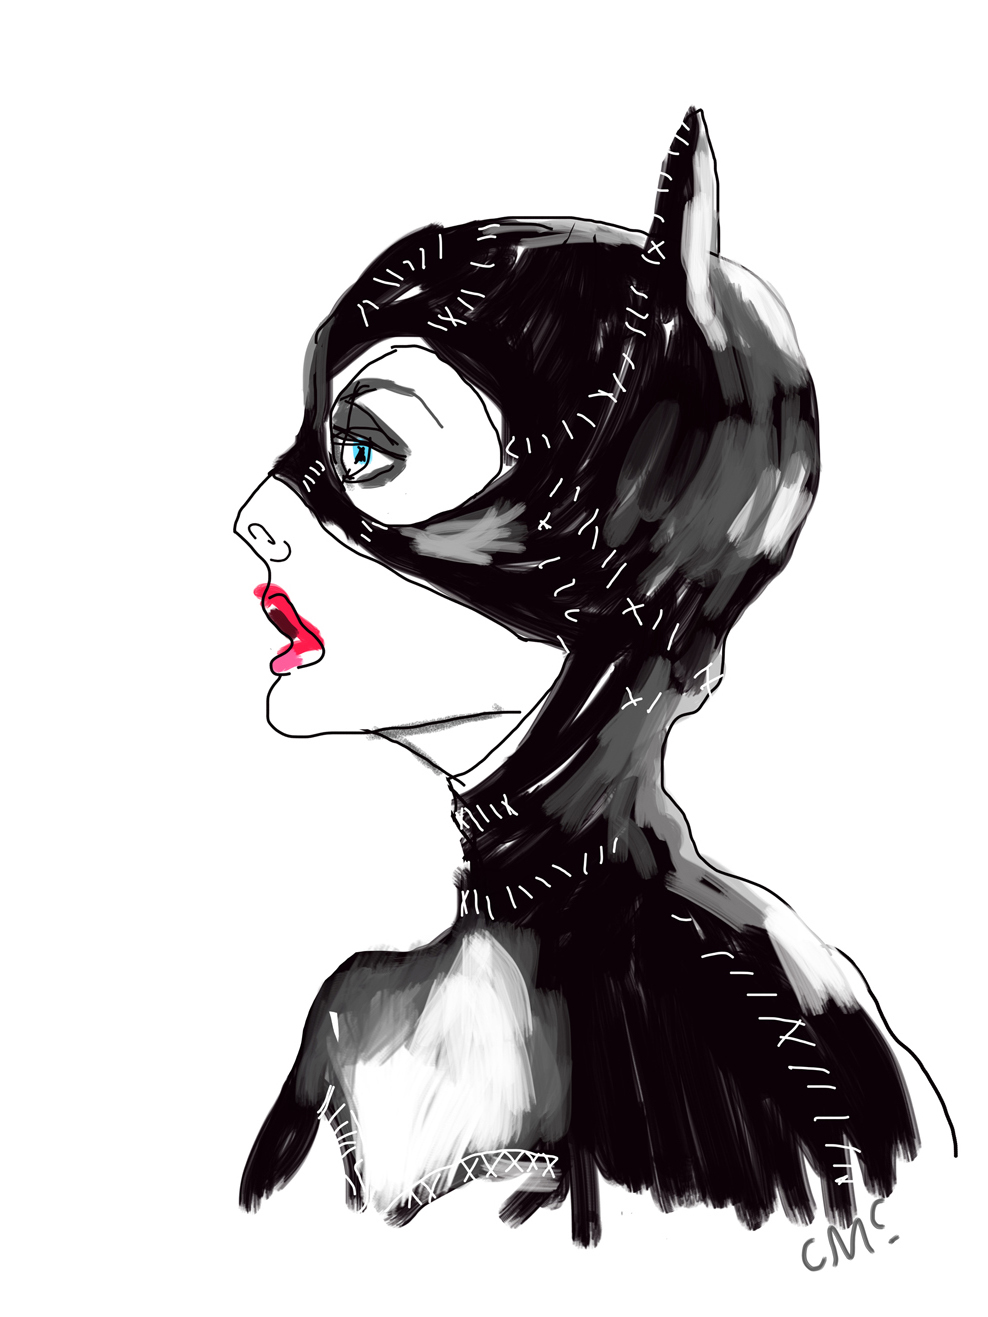   Catwoman  The Globe and Mail 